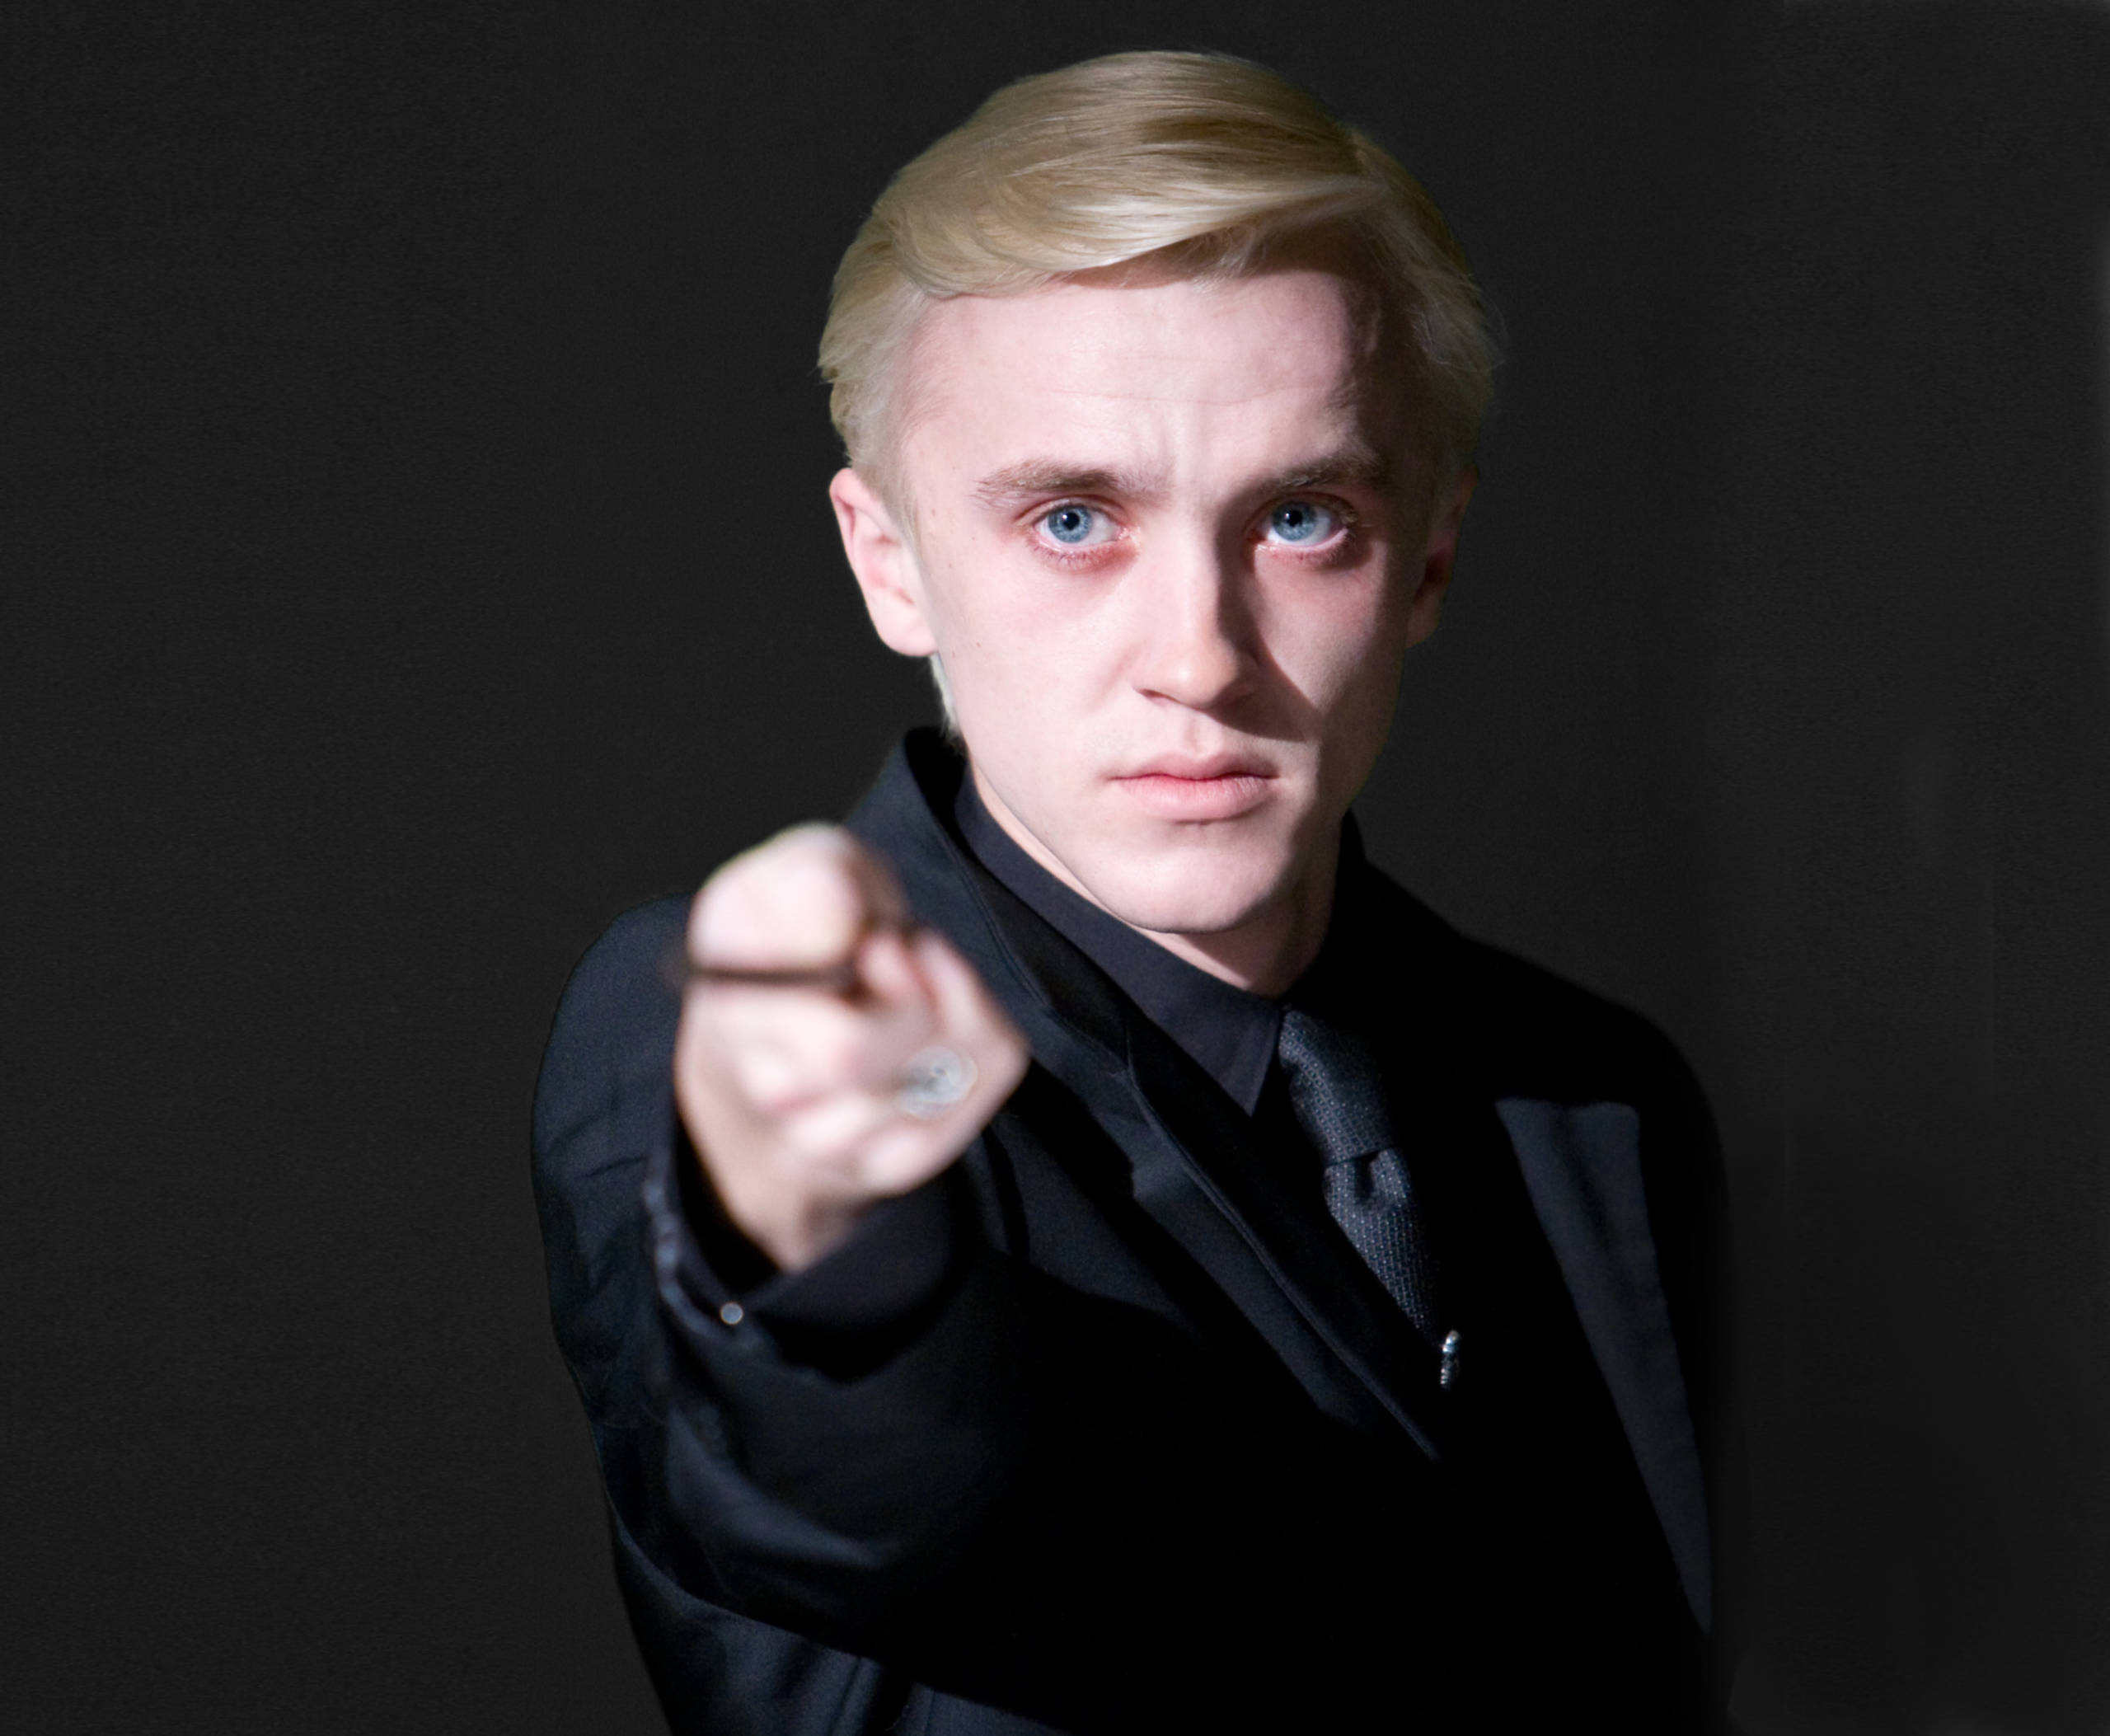 An emotional Draco points his wand 